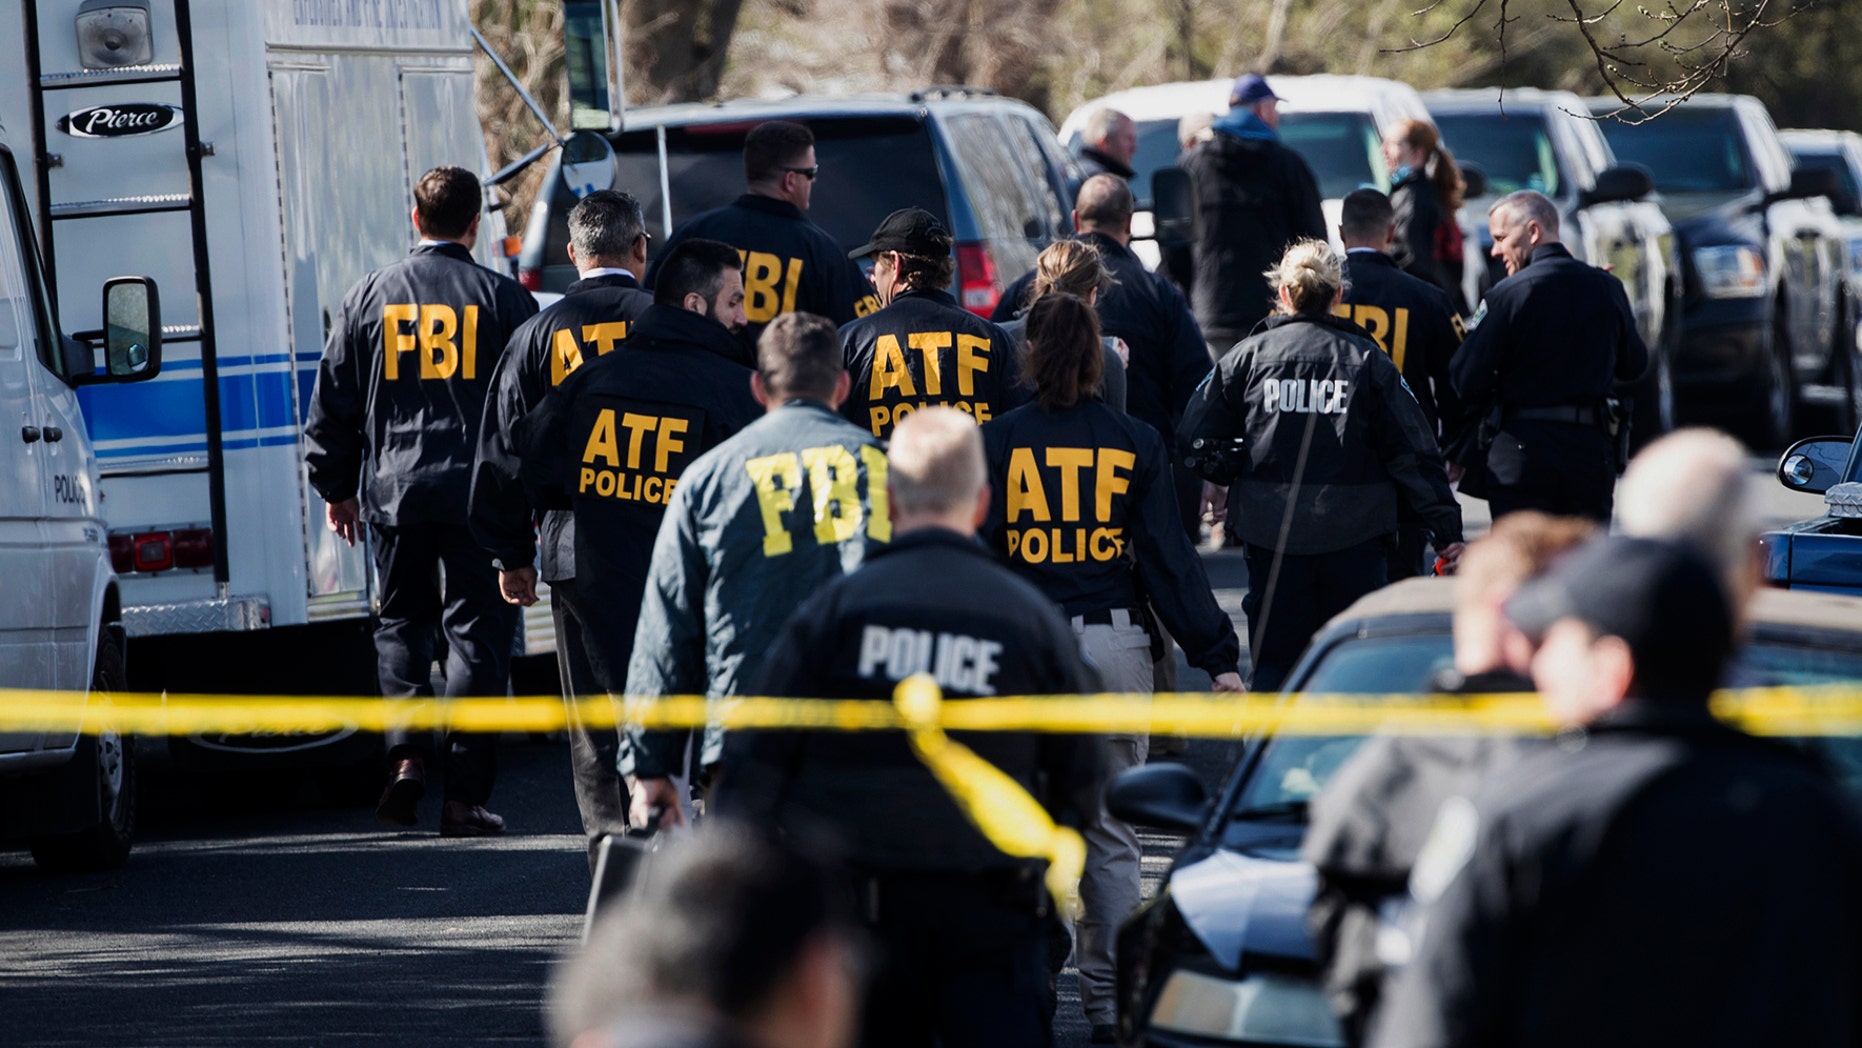 FILE - In this March 12, 2018 file photo, authorities work on the scene of an explosion in Austin, Texas.  Recordings of several 911 calls made after a series of deadly package bombings in Austin last year show the chaos and panic that gripped the city.  (Ricardo B. Brazziell/Austin American-Statesman via AP)